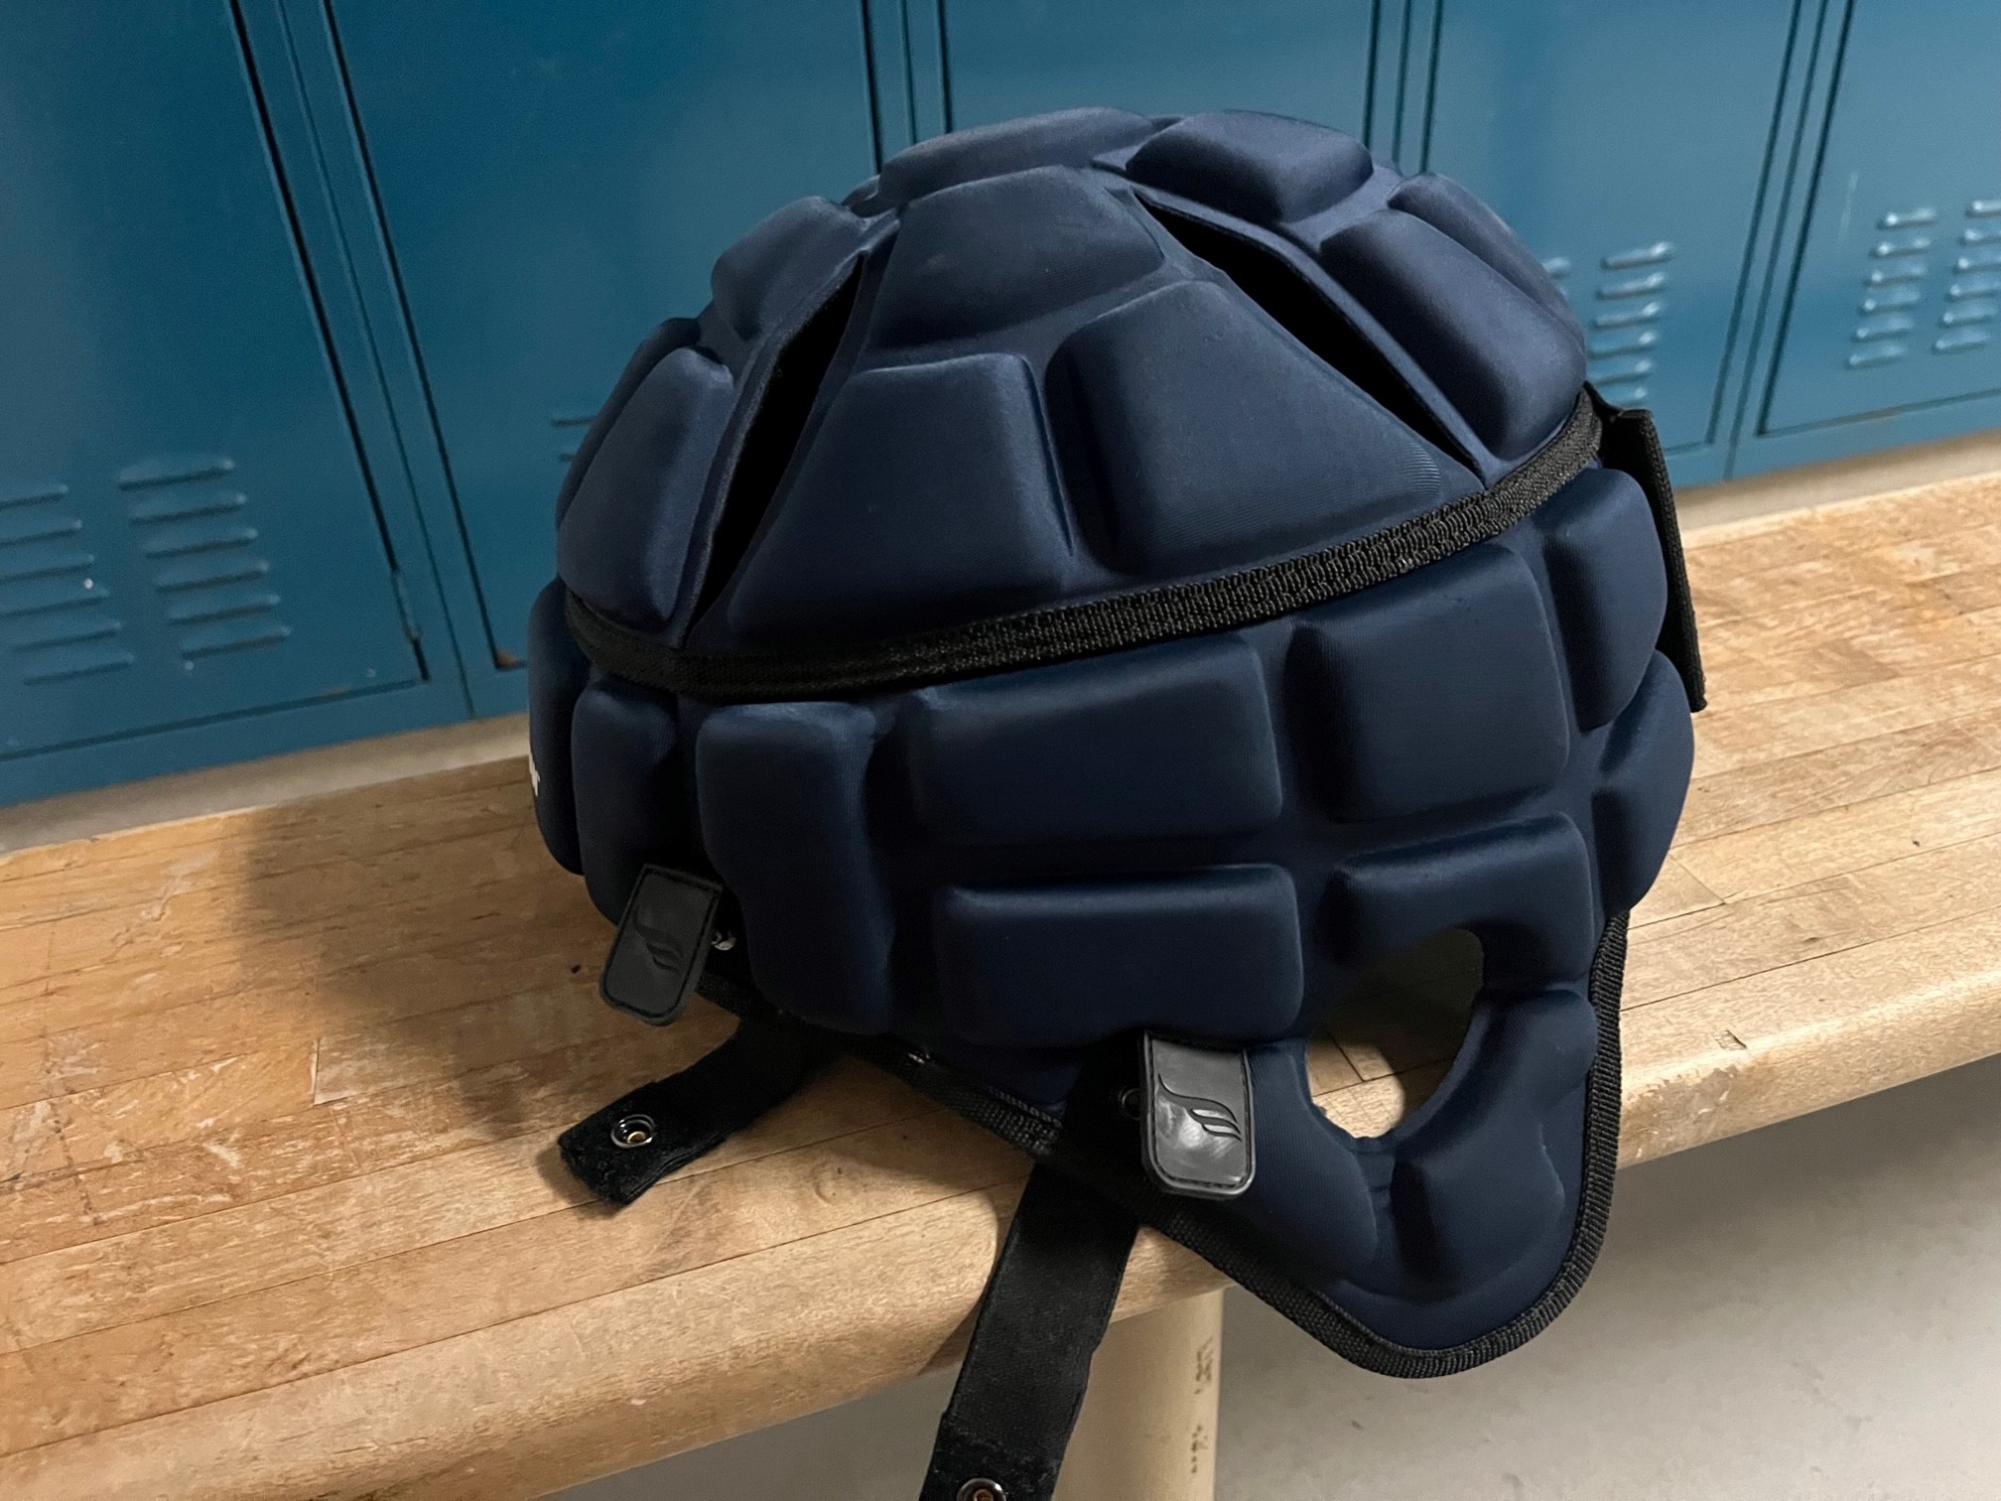 Guardians easily slip on over a traditional helmet with little effort. They attach using Velcro and provide extra safety against constant hits to the head.